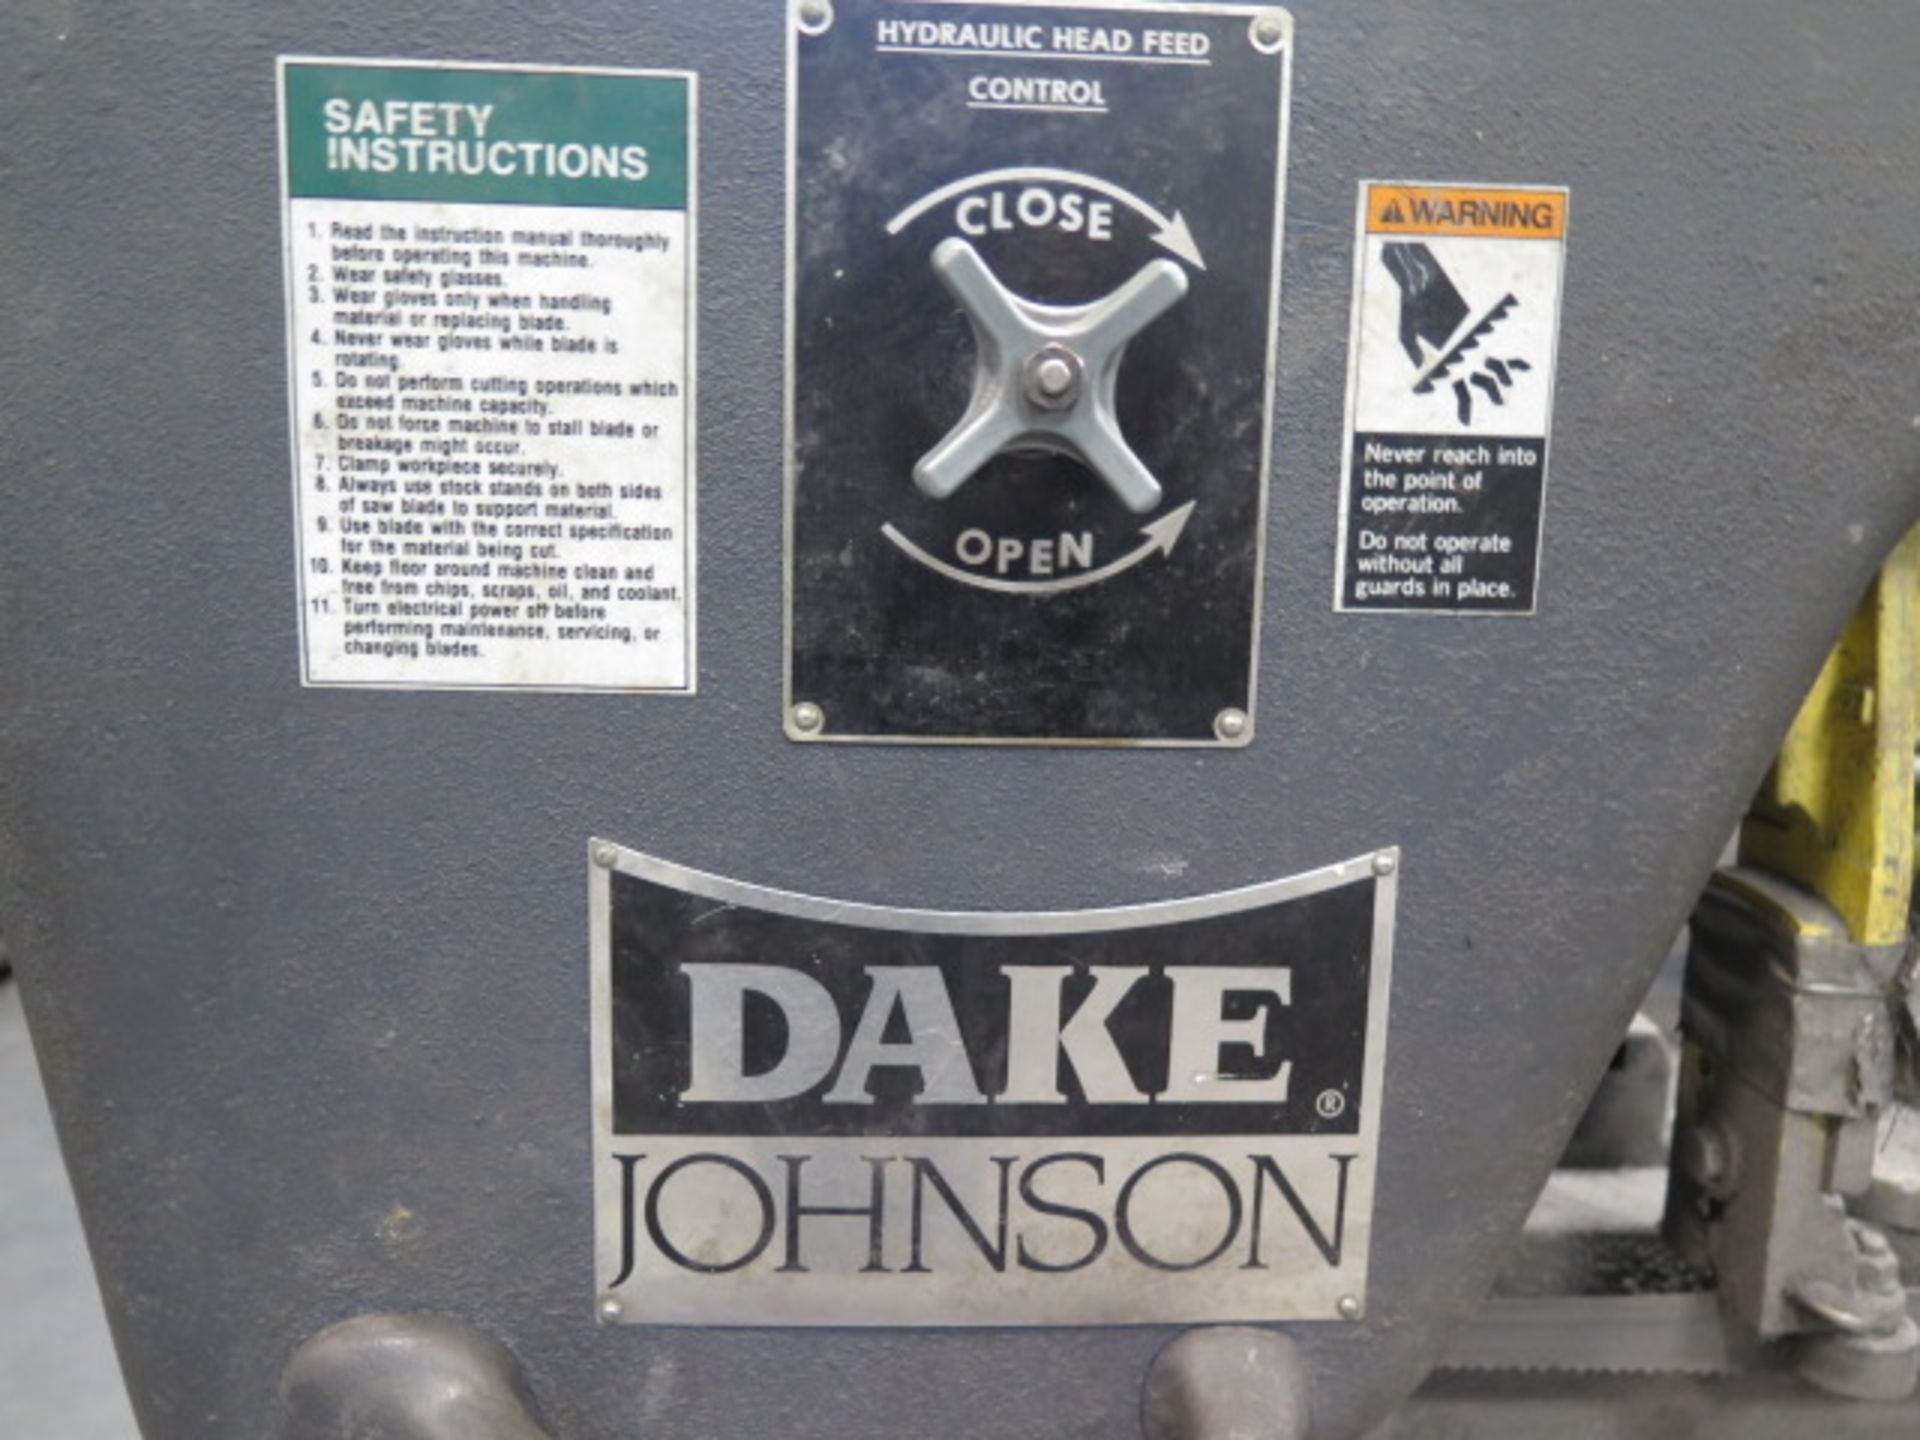 Dake / Johnson mdl. J10 10” Horizontal Band Saw s/n 193628 w/ Manual Clamping, Work Stop SOLD AS-IS - Image 7 of 7